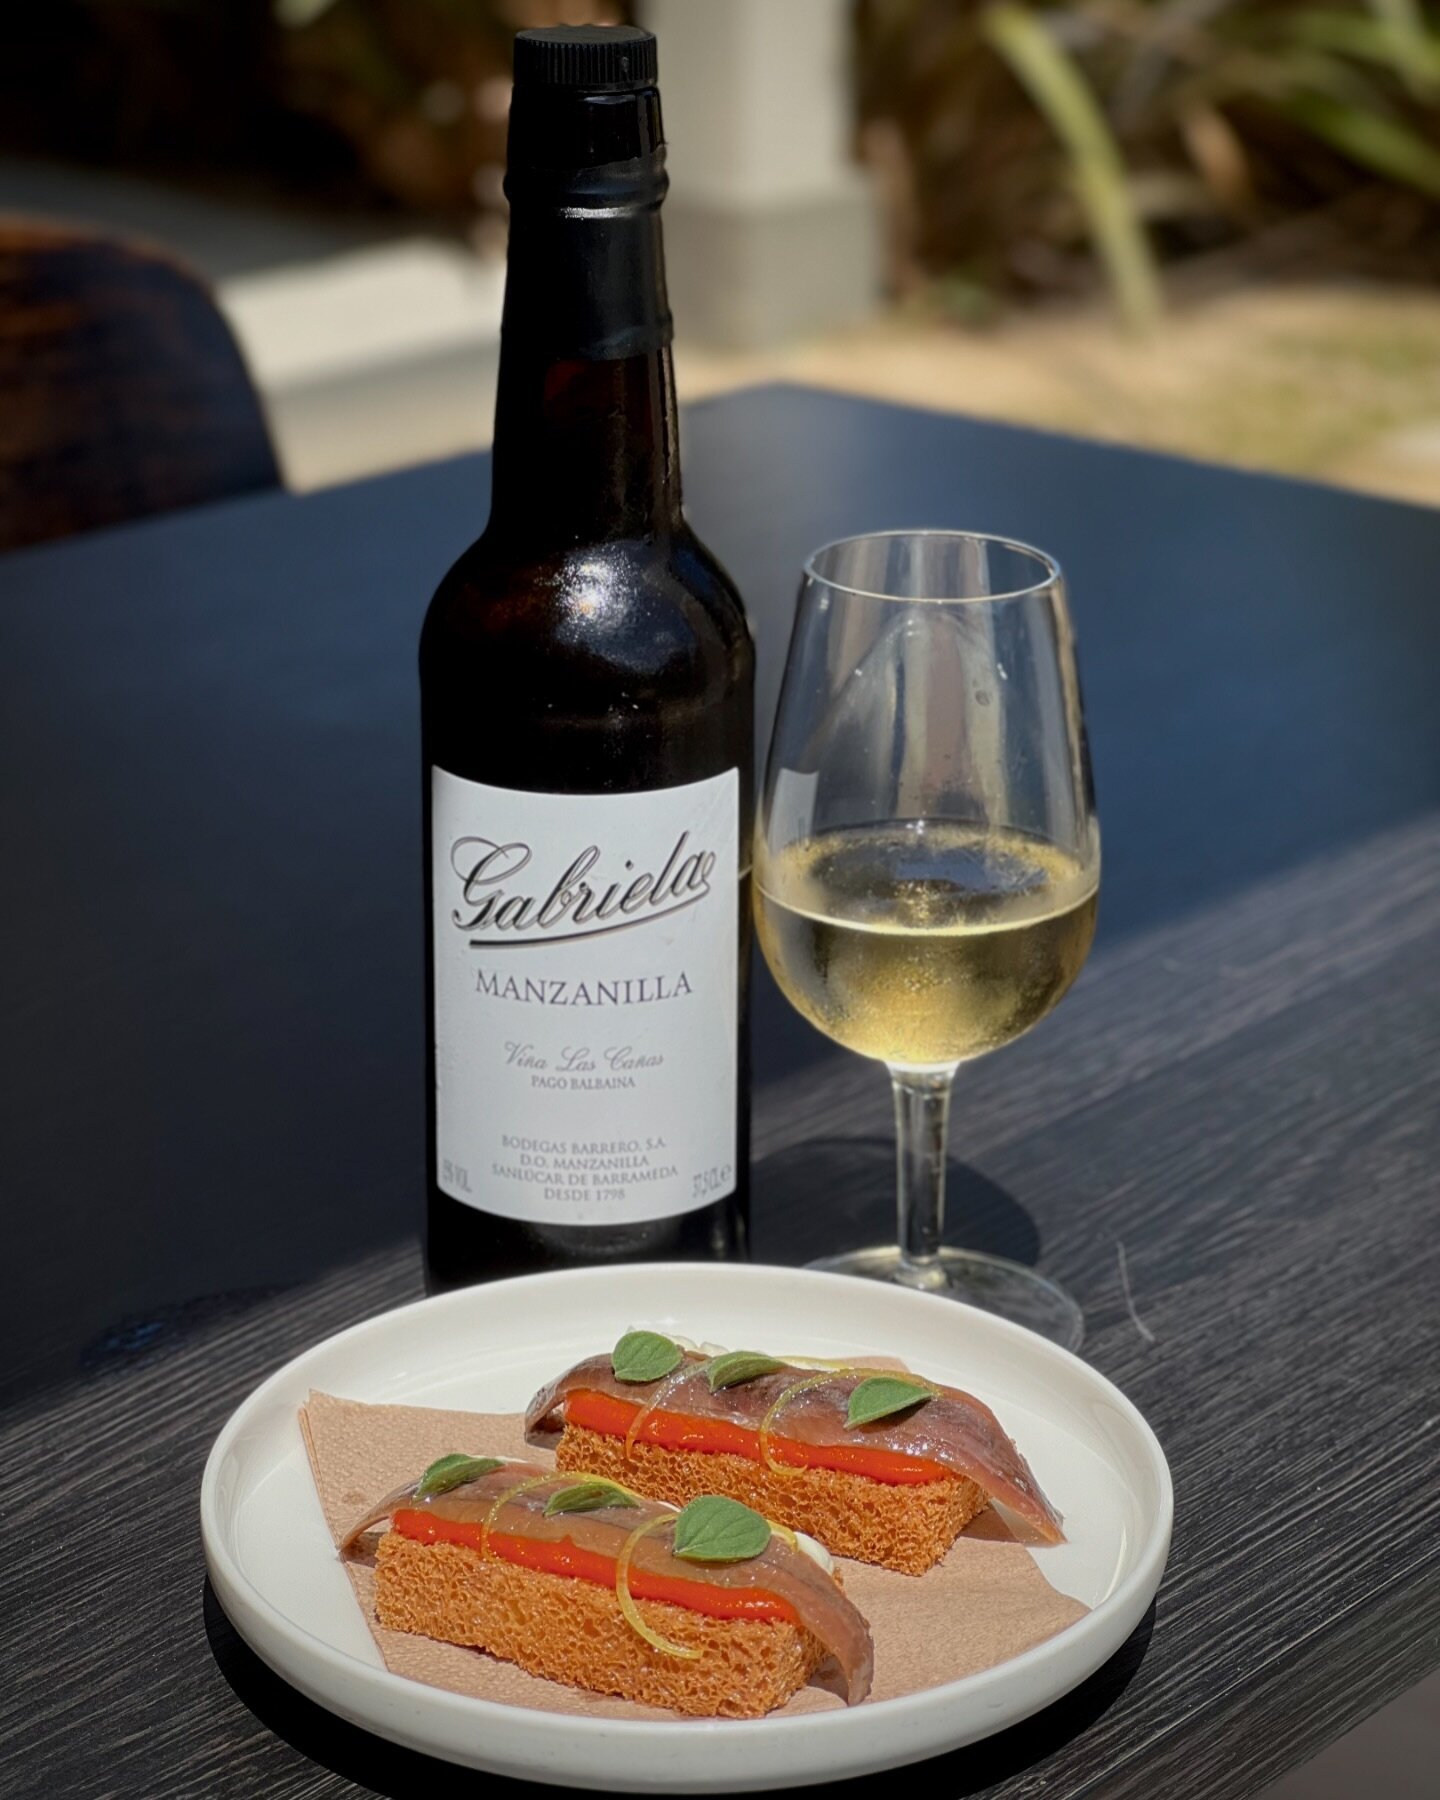 Consorcio Anchovy / Pane Fritte / Ricotta / Tomato
As the Spaniards would do, this snack with a glass of Gabriella Manzanilla Fino Sherry makes a wonderful pairing. 
A savoury &amp; briny palate with bright citrus balance that is light &amp; refreshi